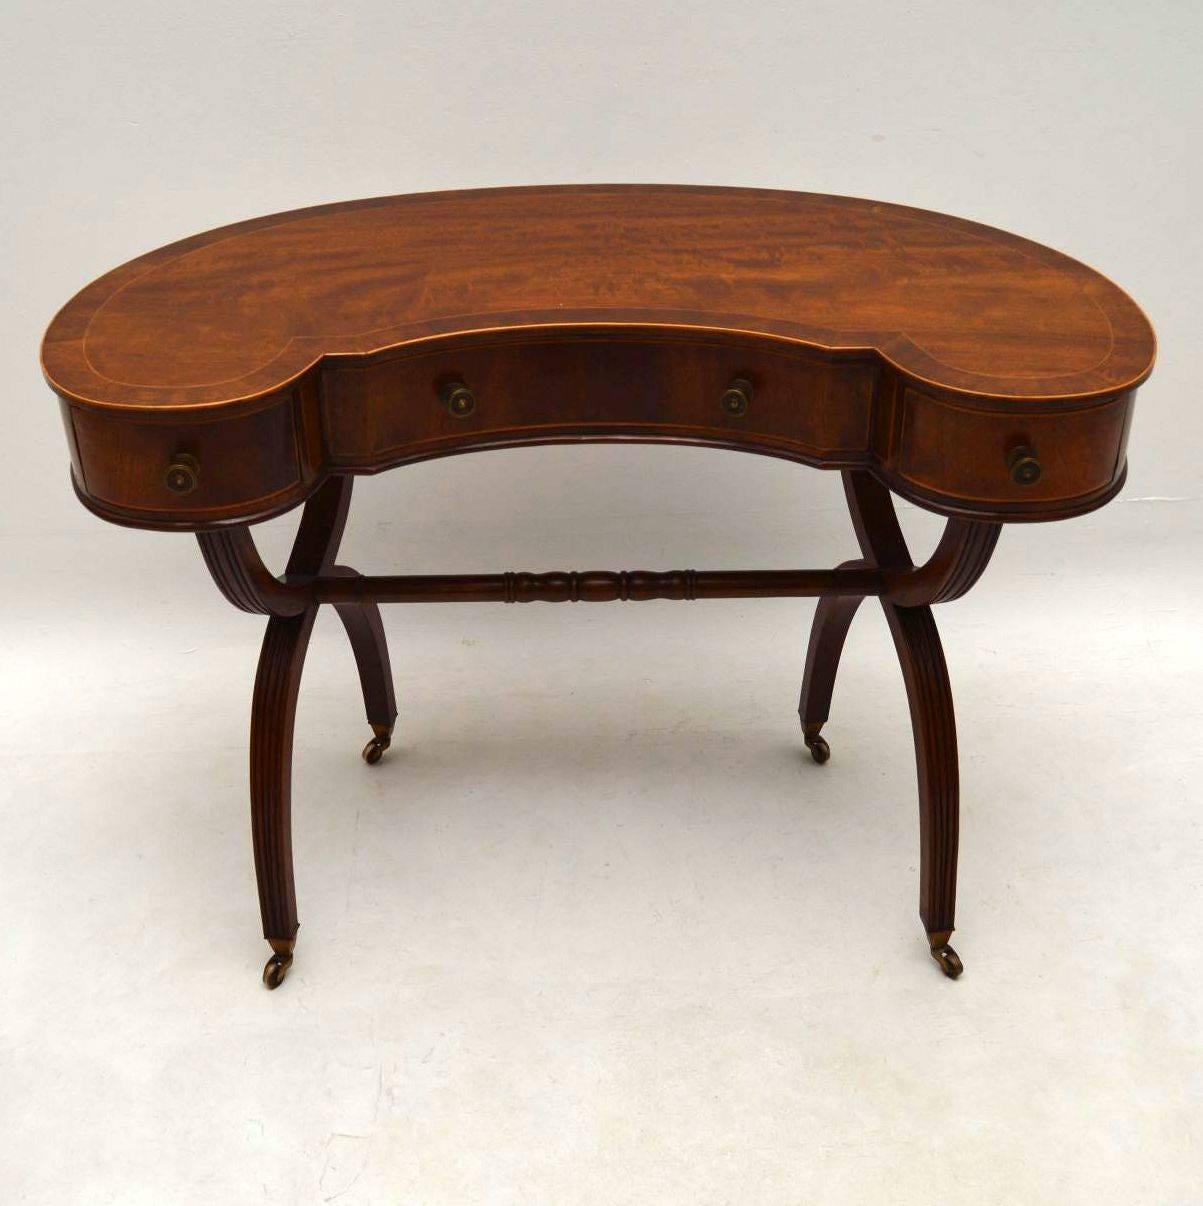 This mahogany kidney shaped table could be used as a desk or dressing table. It’s antique, dating from around the 1910 period and is in excellent condition. This piece is also very fine quality. The top has an inlaid crossbanded edge. There are